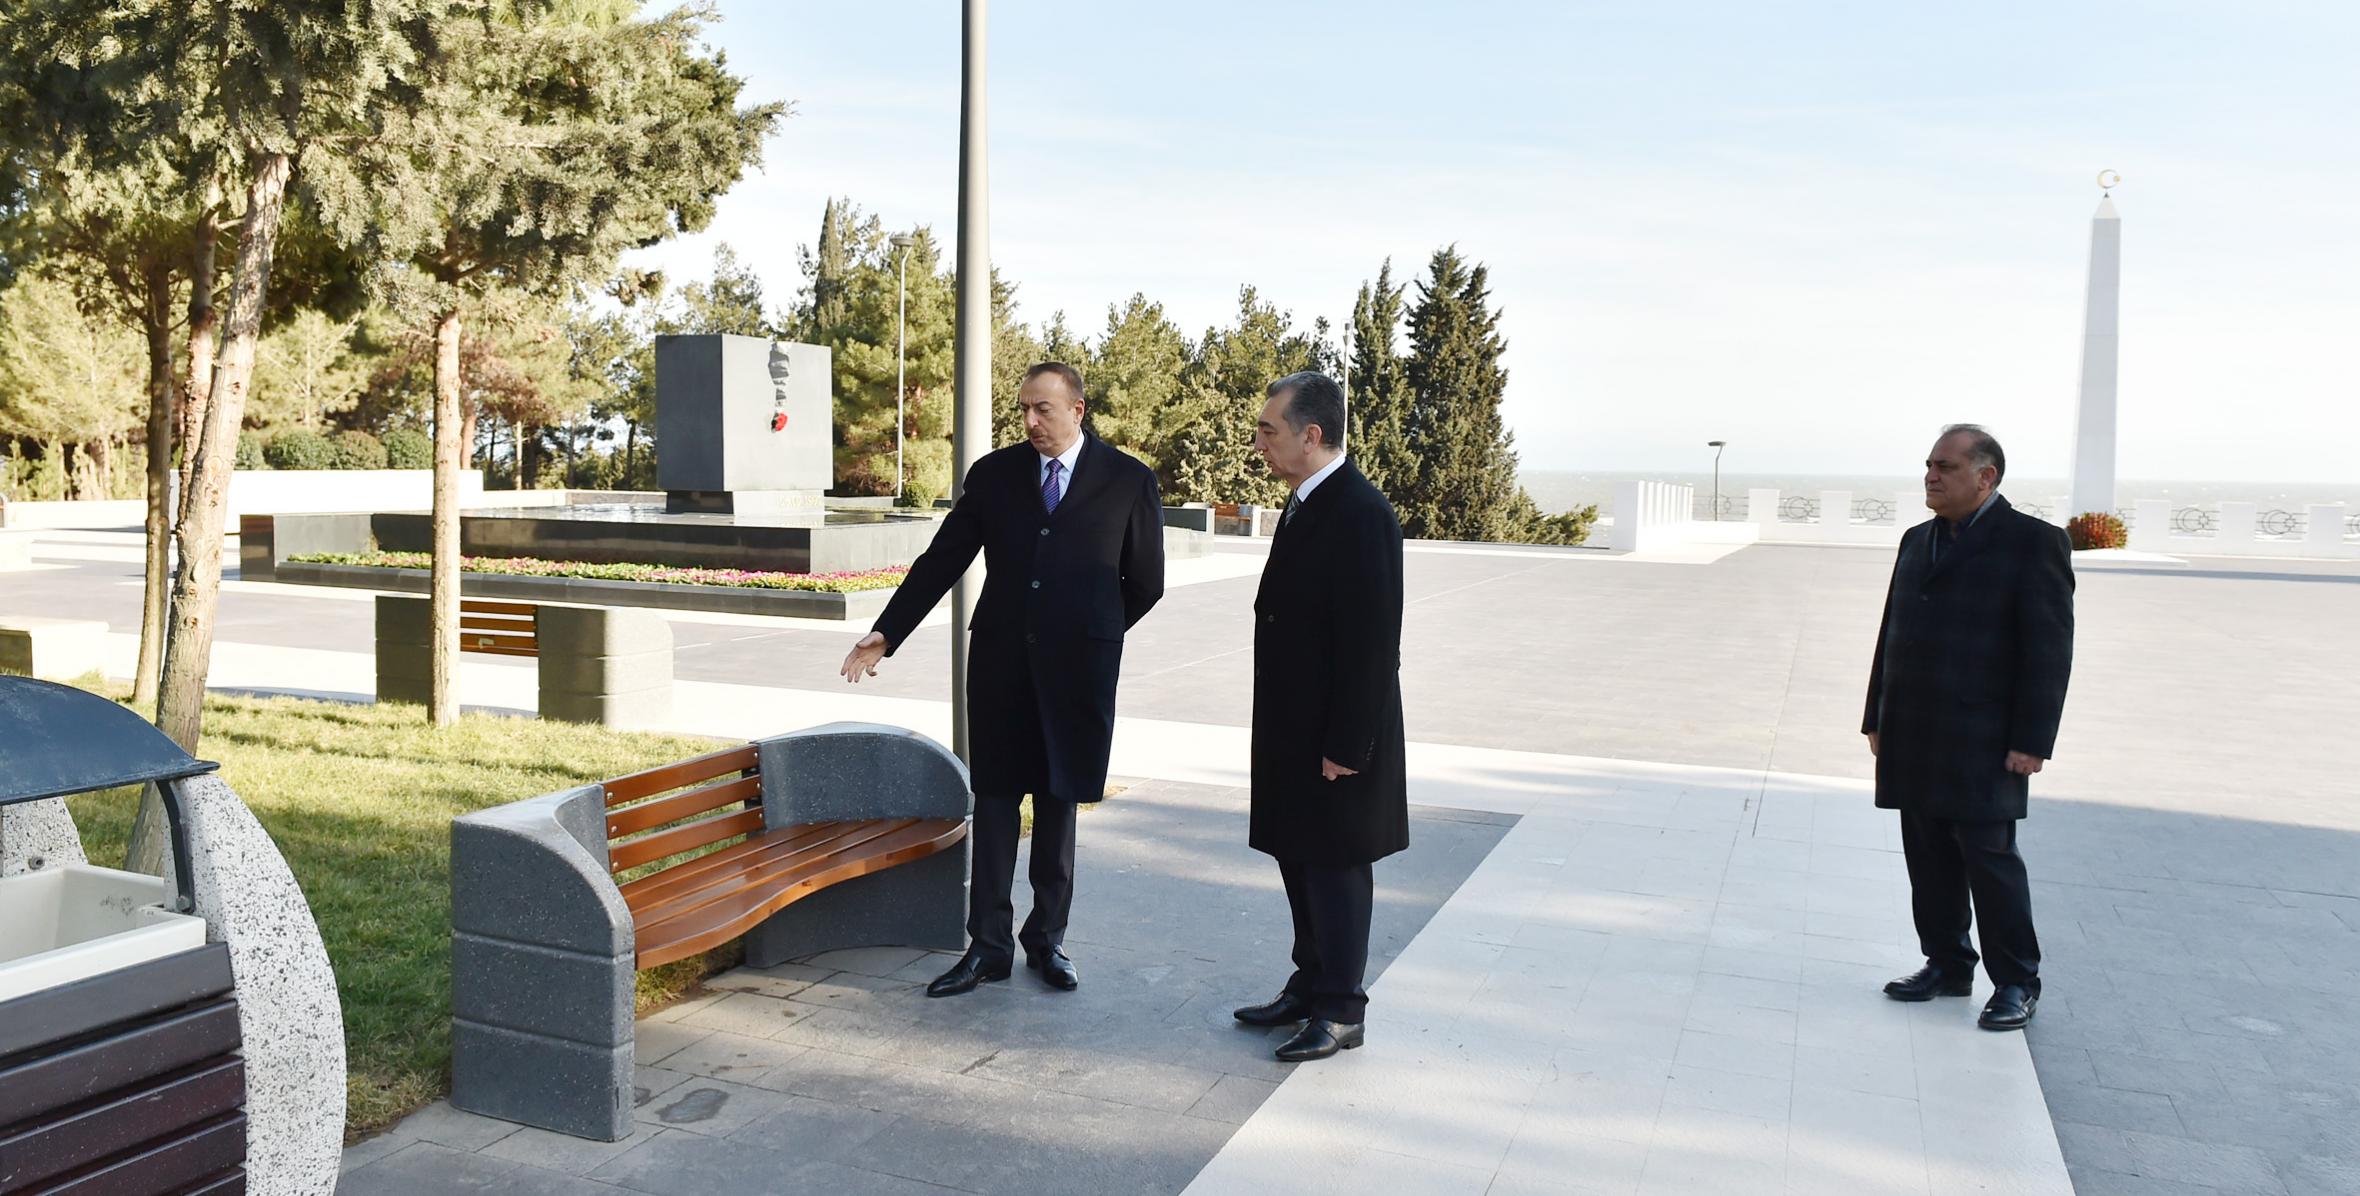 Ilham Aliyev reviewed the ongoing reconstruction work in the city culture and recreation park after Nasimi in Sumgayit